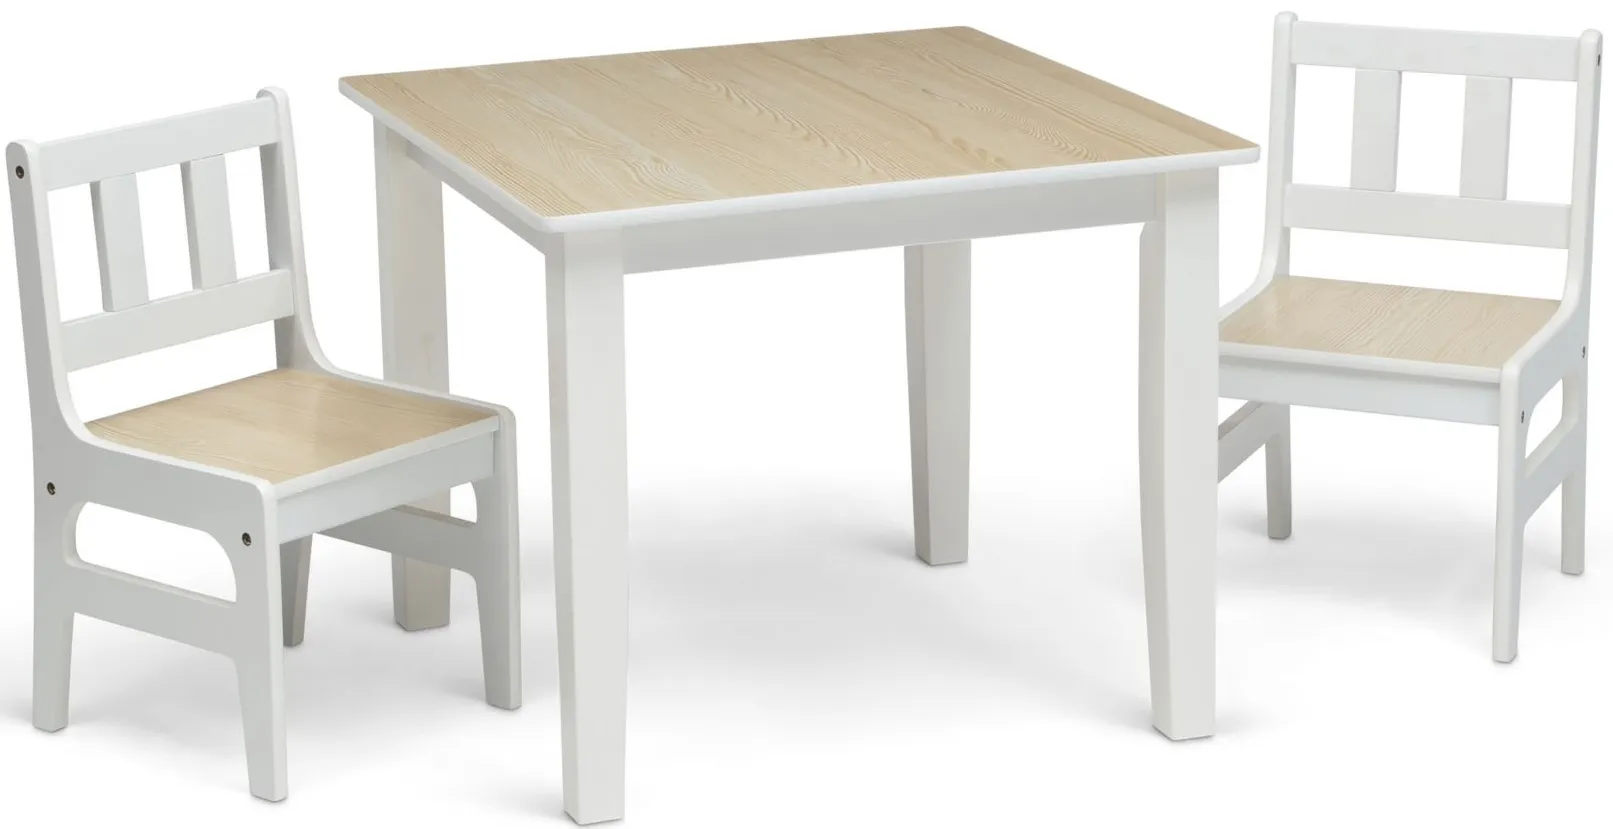 Table and Two Chair Set by Delta Children in Natural/White by Delta Children